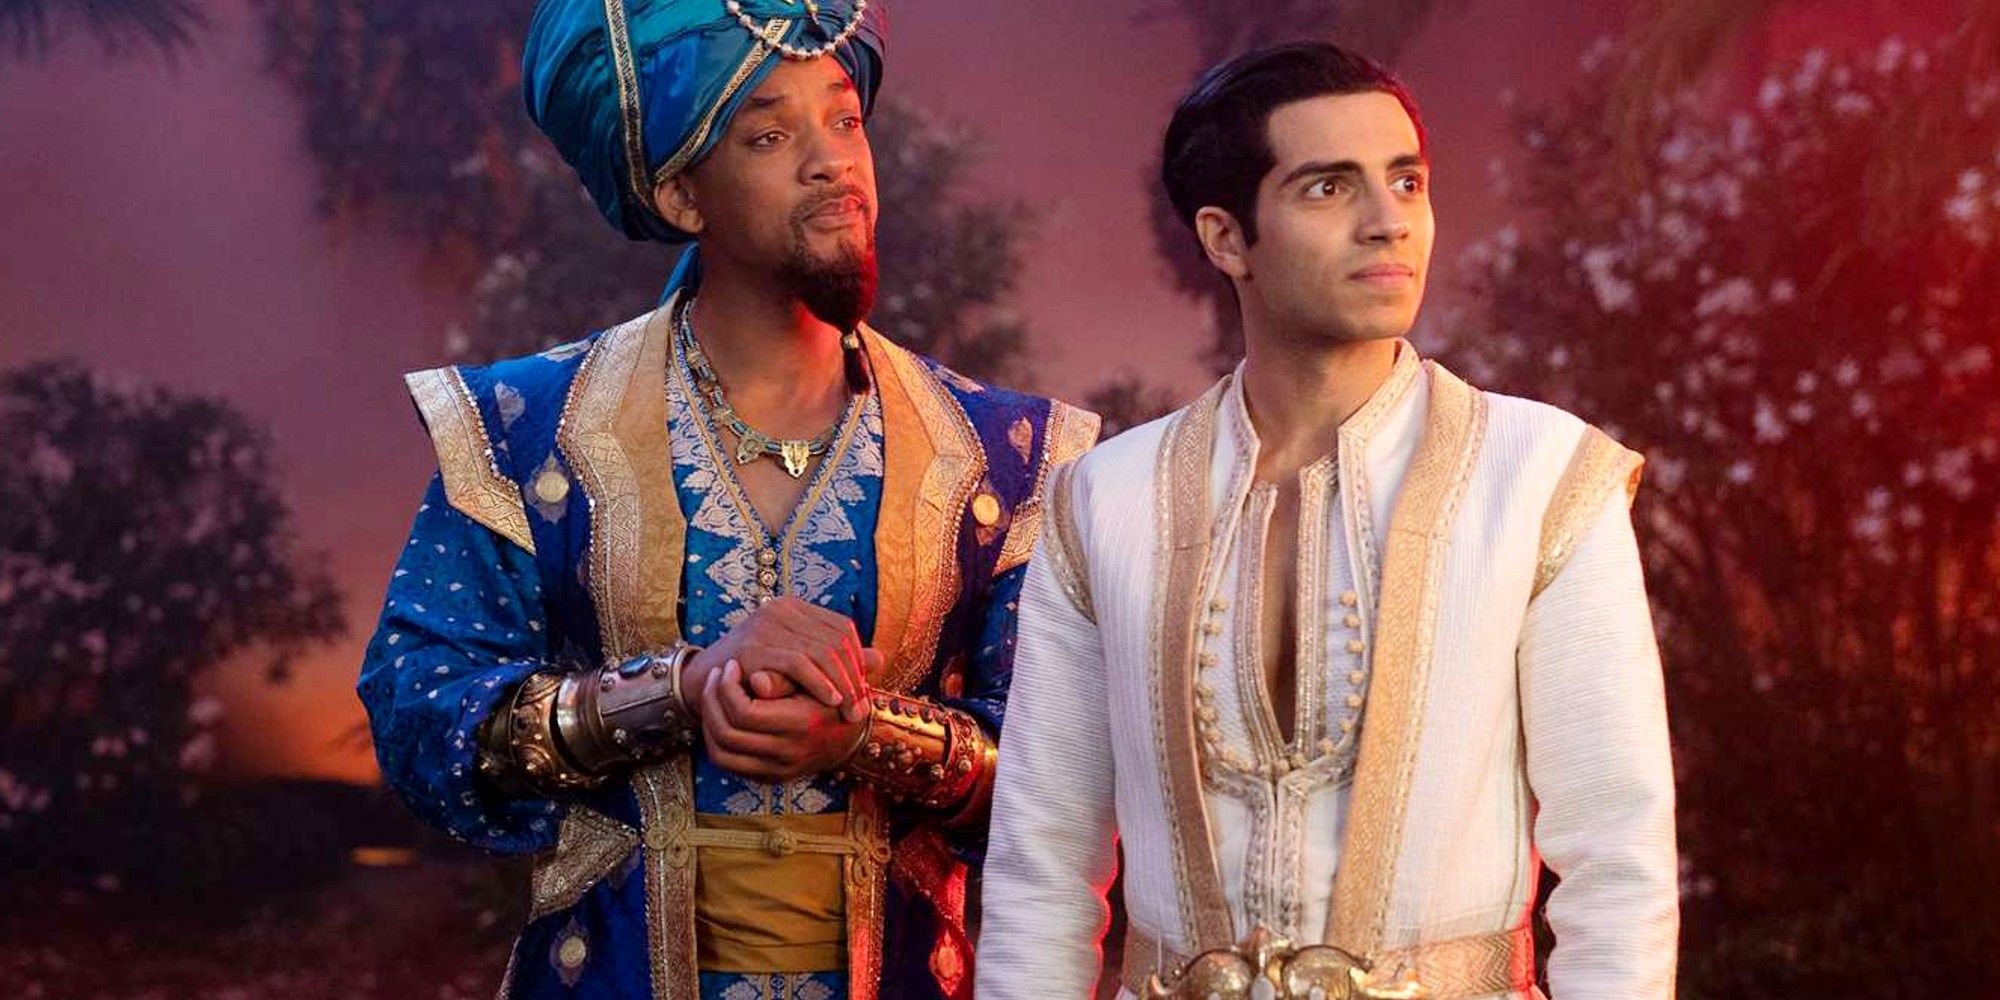 Aladdin Will Smith and Mena Massoud as Genie and Aladdin in live action movie